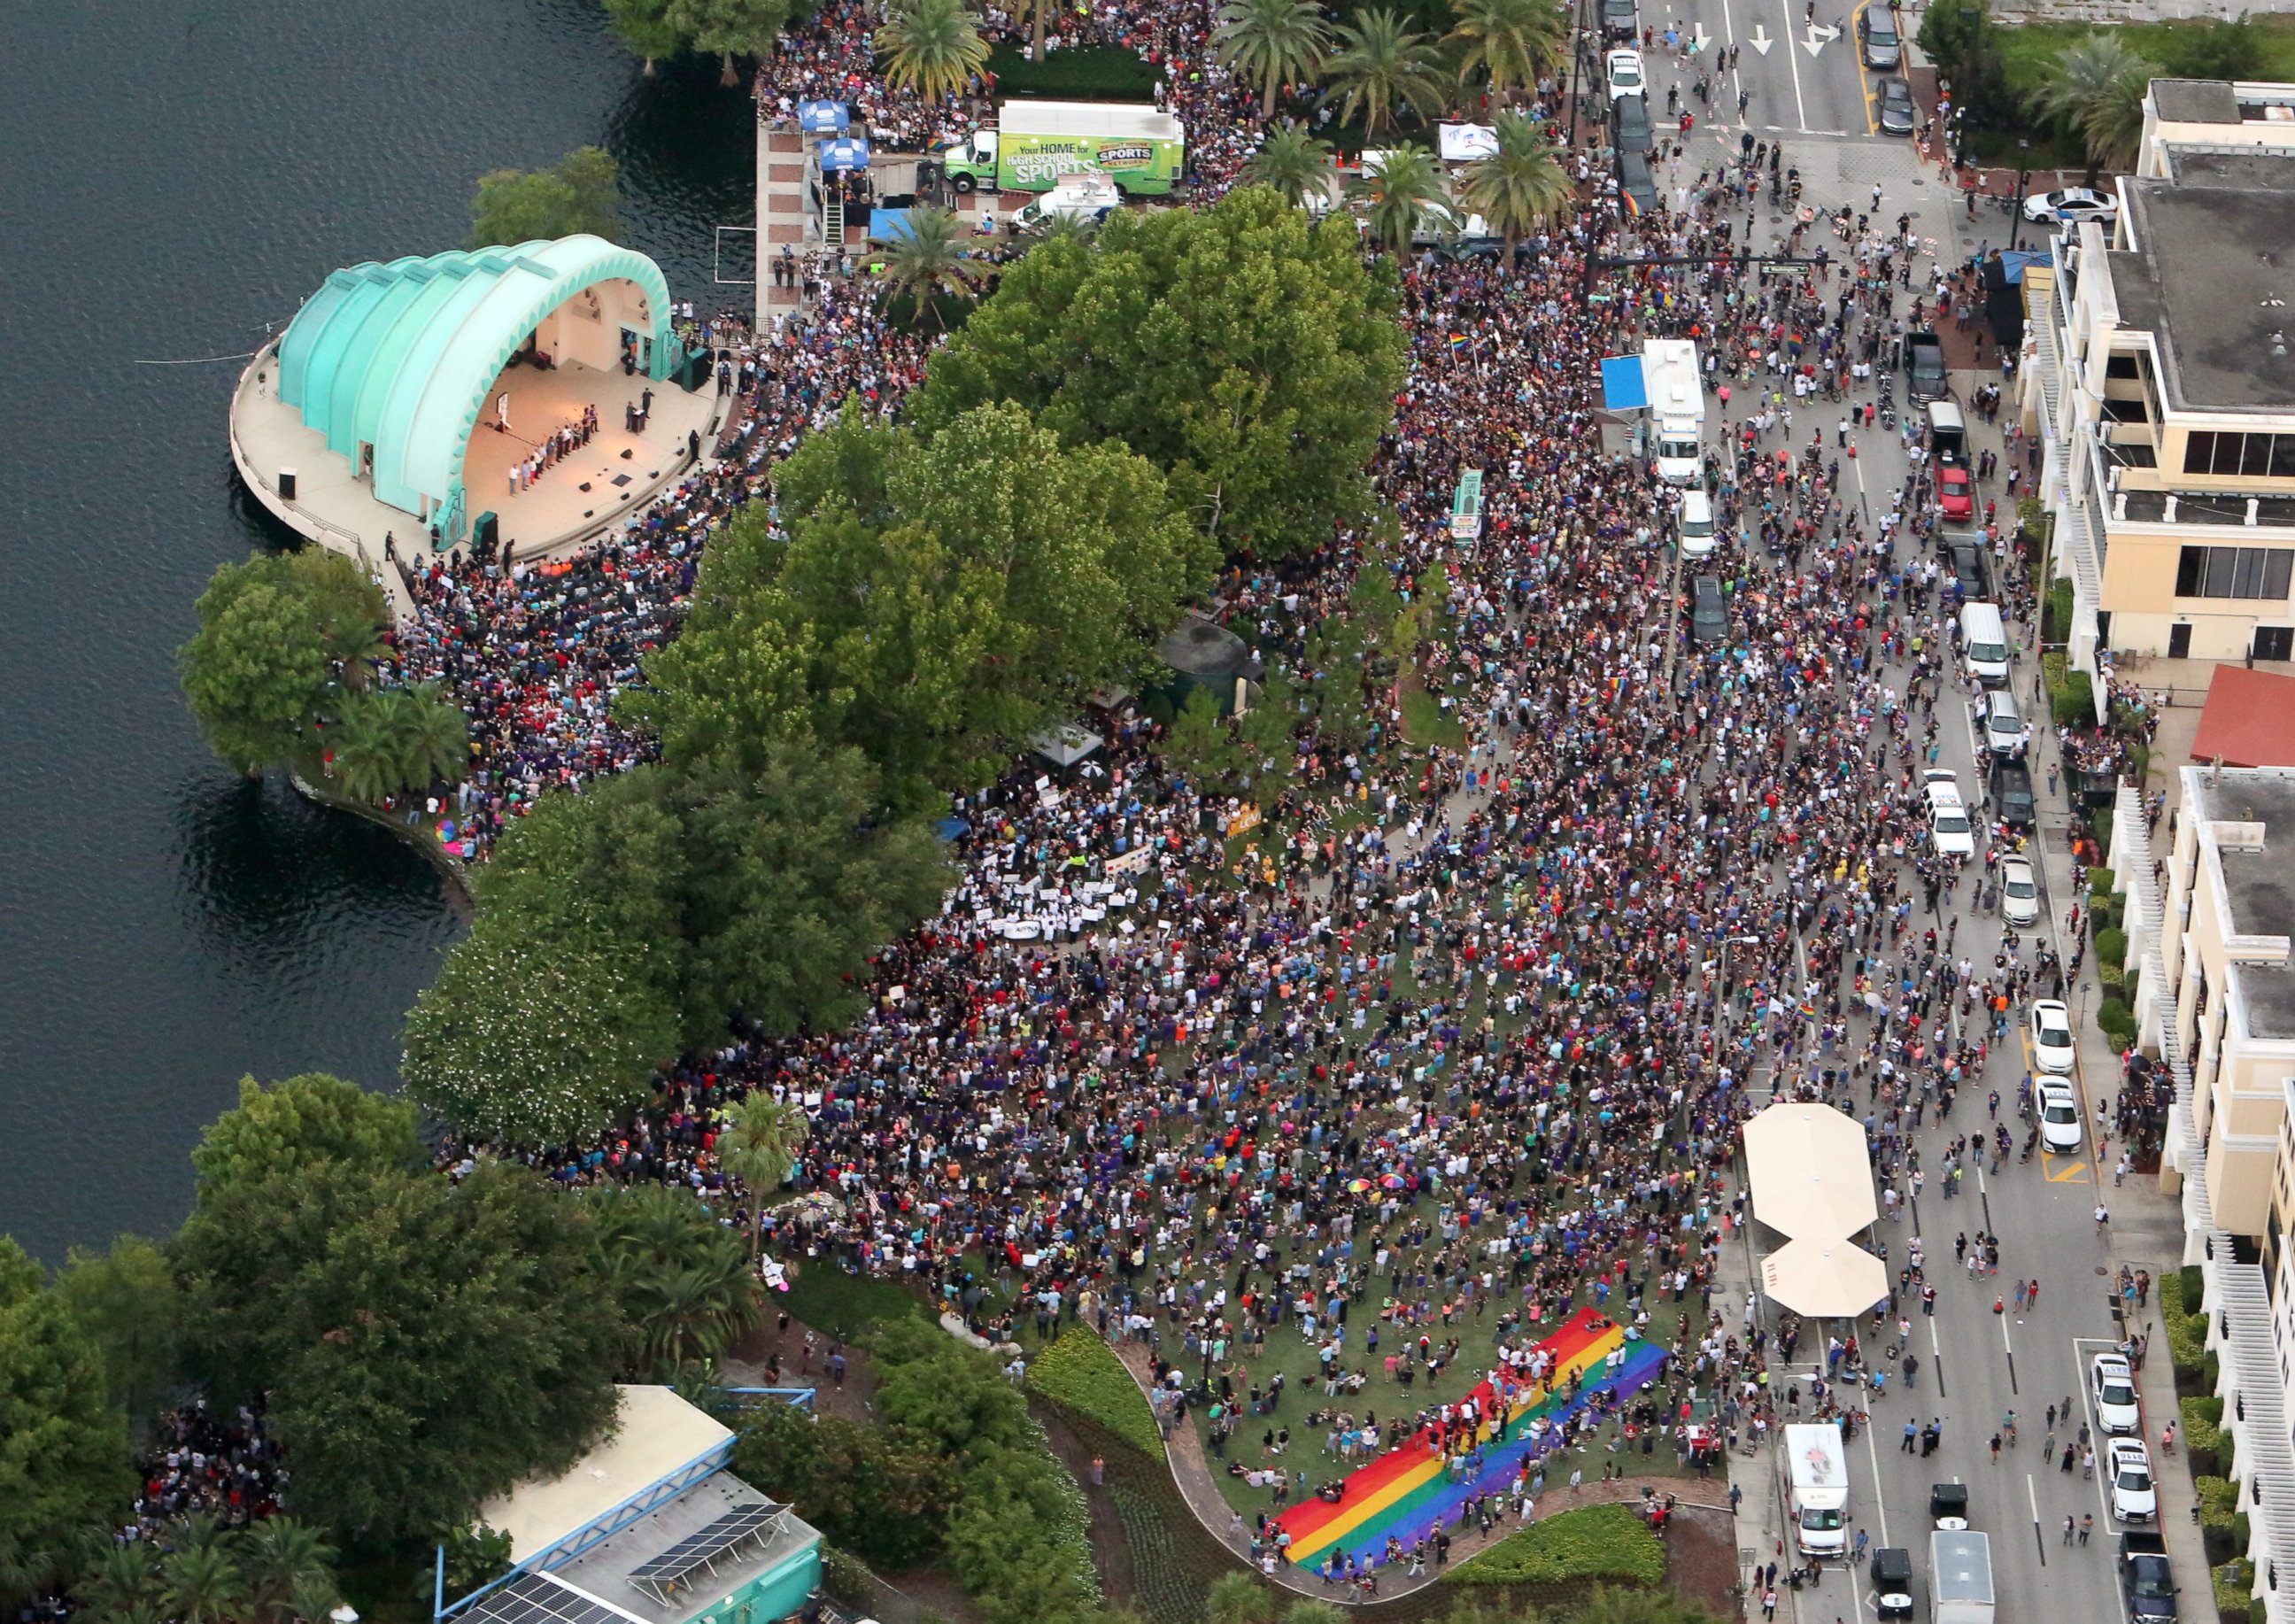 PHOTO: Tens of thousands of people attend a Pulse nightclub shooting vigil by Lake Eola in Orlando, June 19, 2016.